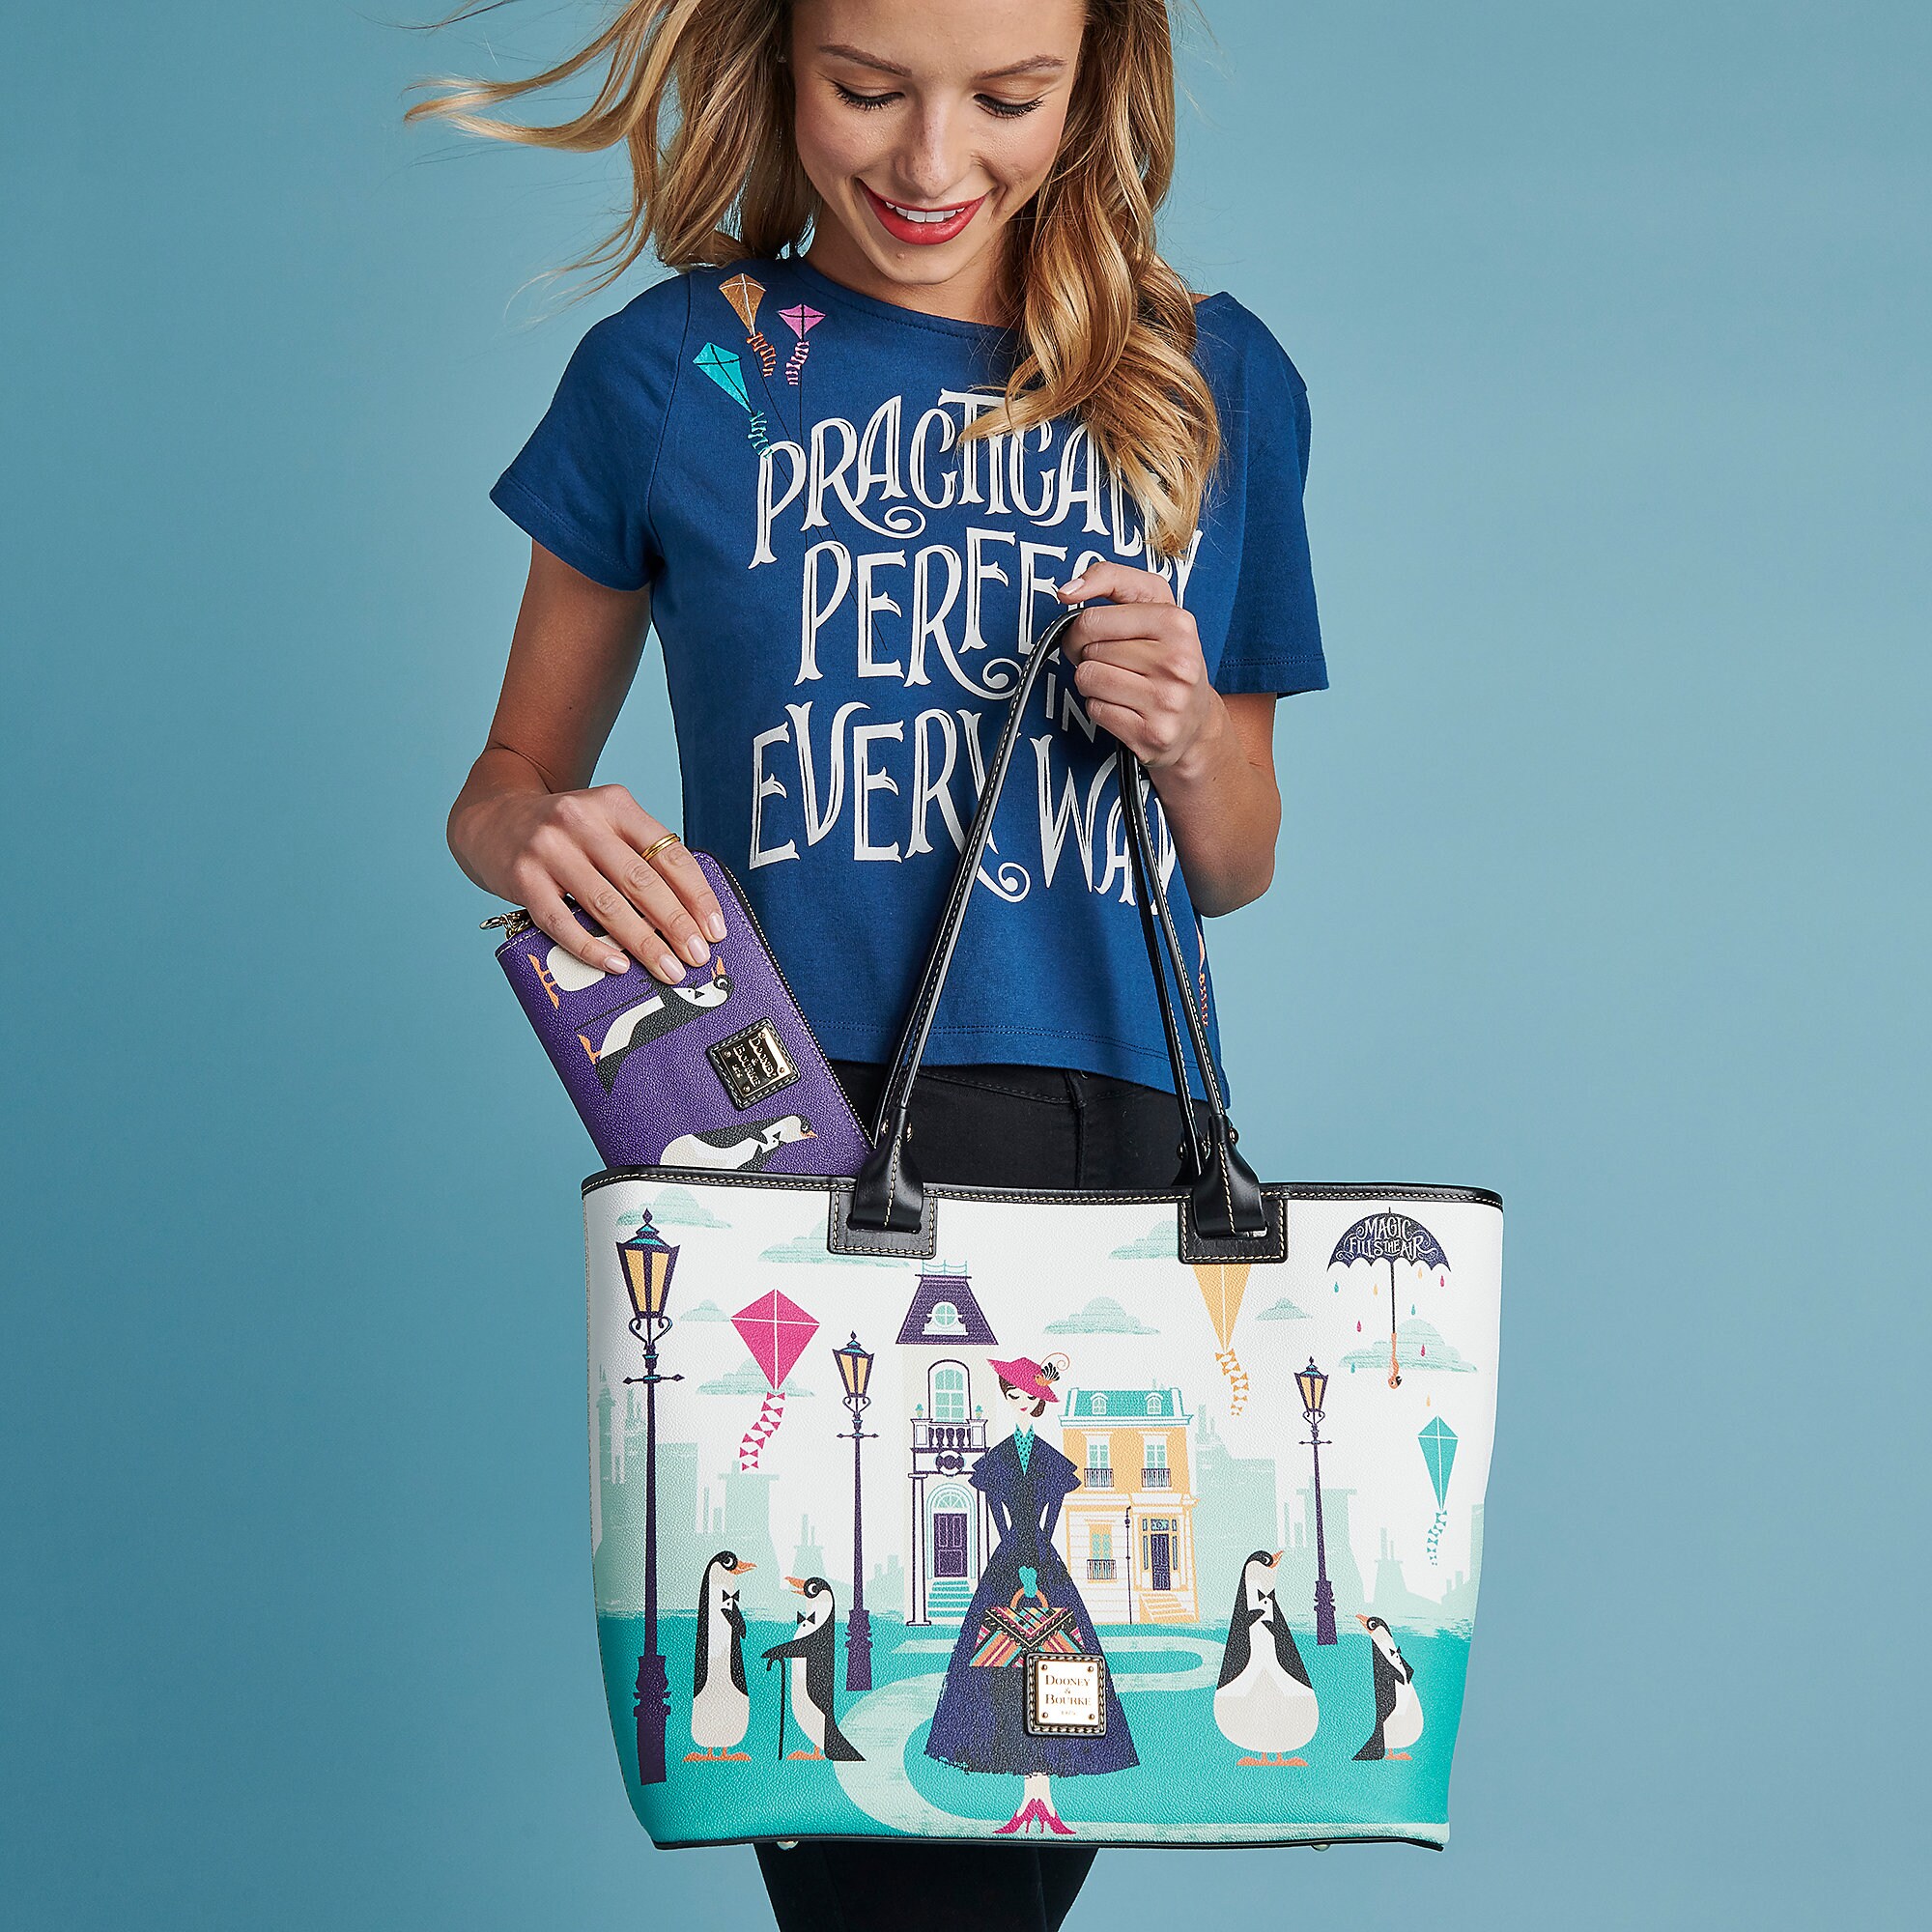 Mary Poppins Returns Tote by Dooney & Bourke